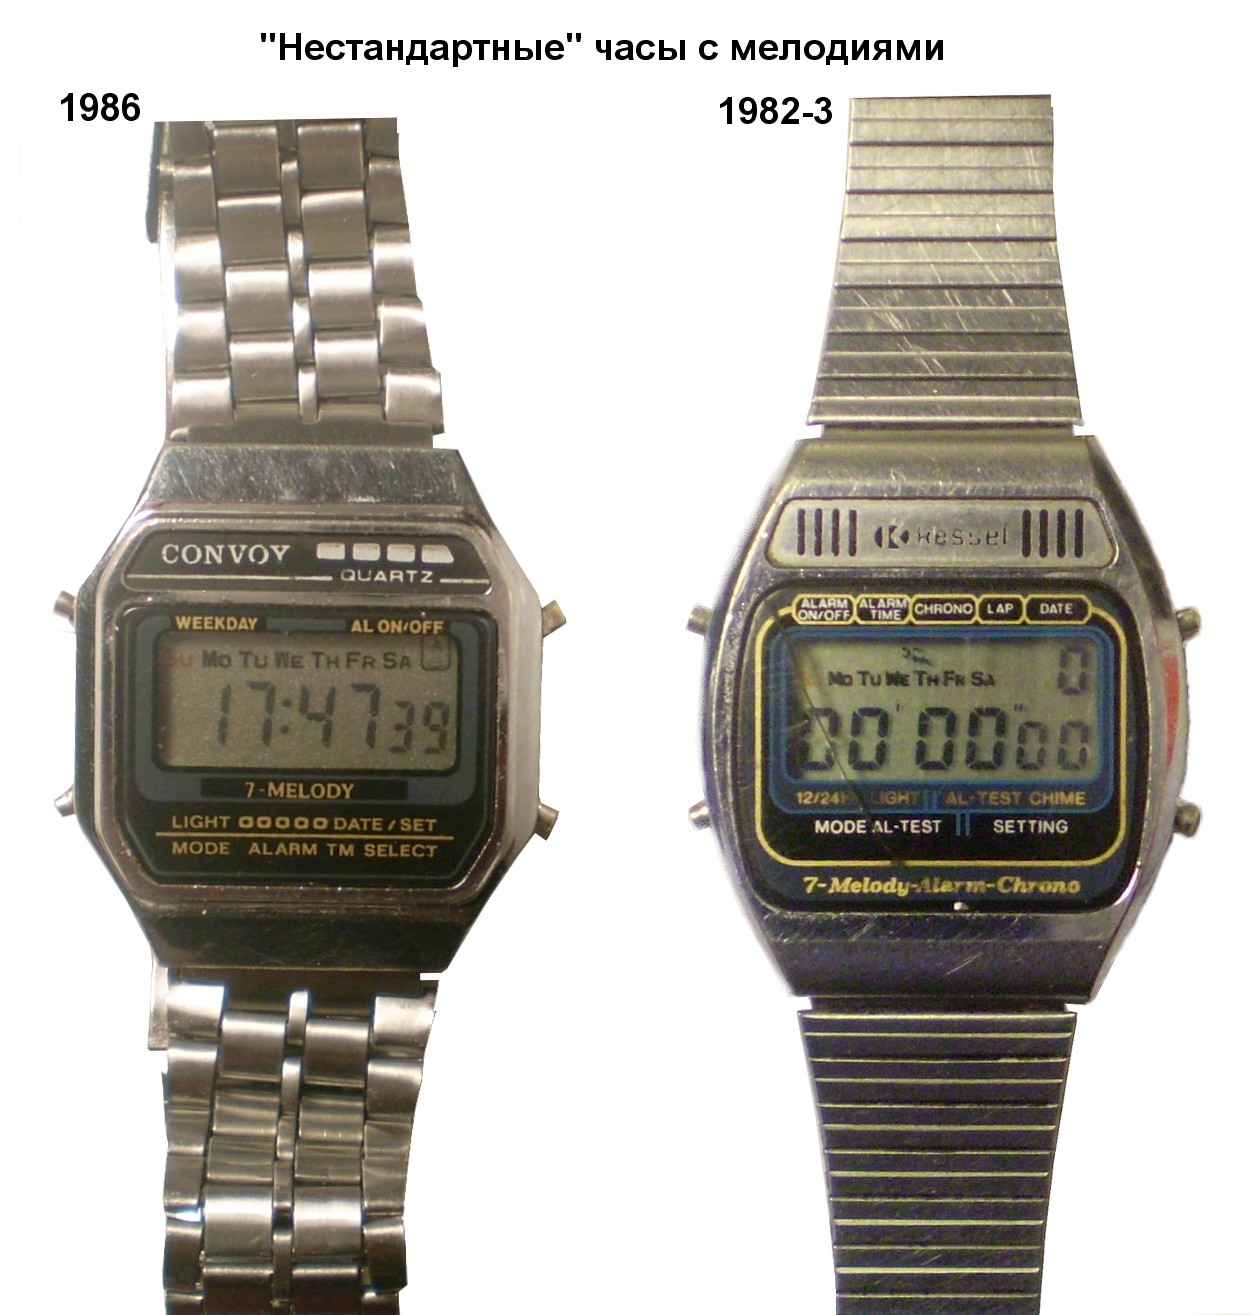 Soviet Digital Watches - Lets see them! - Page 3